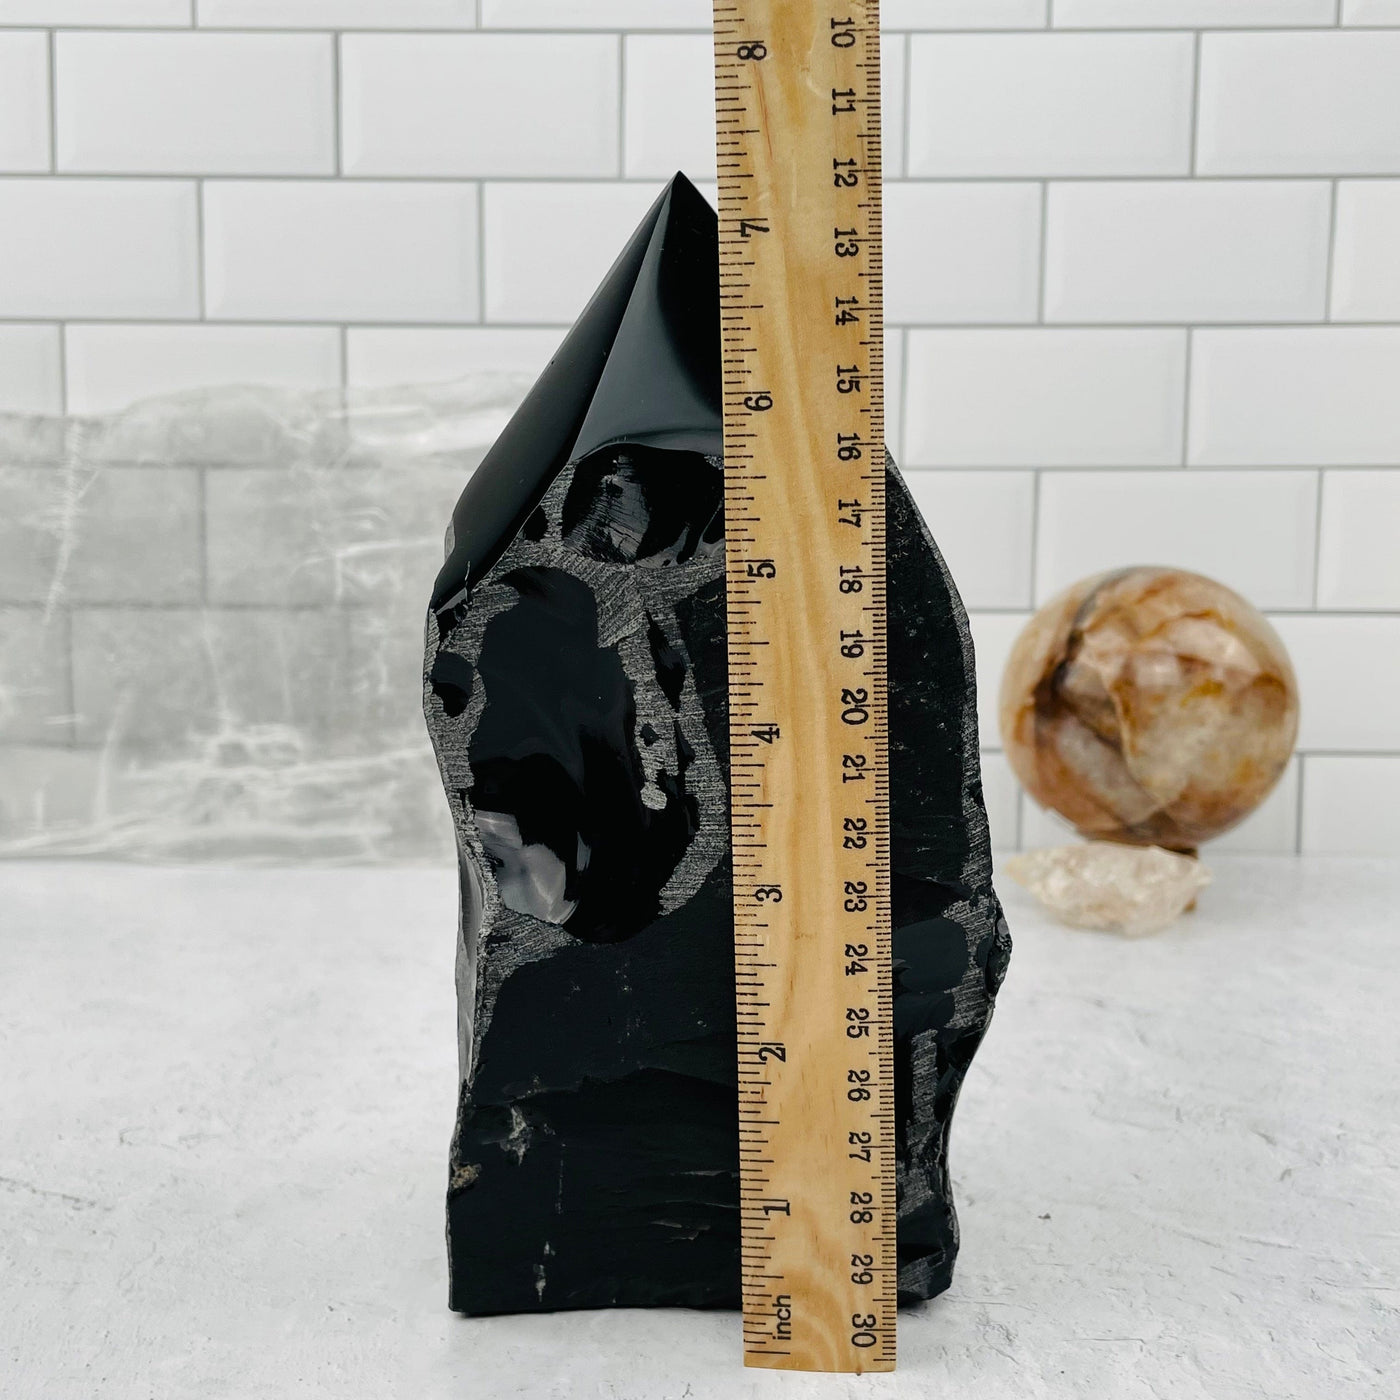 Black Obsidian Large Semi Polished Point with a ruler for size reference